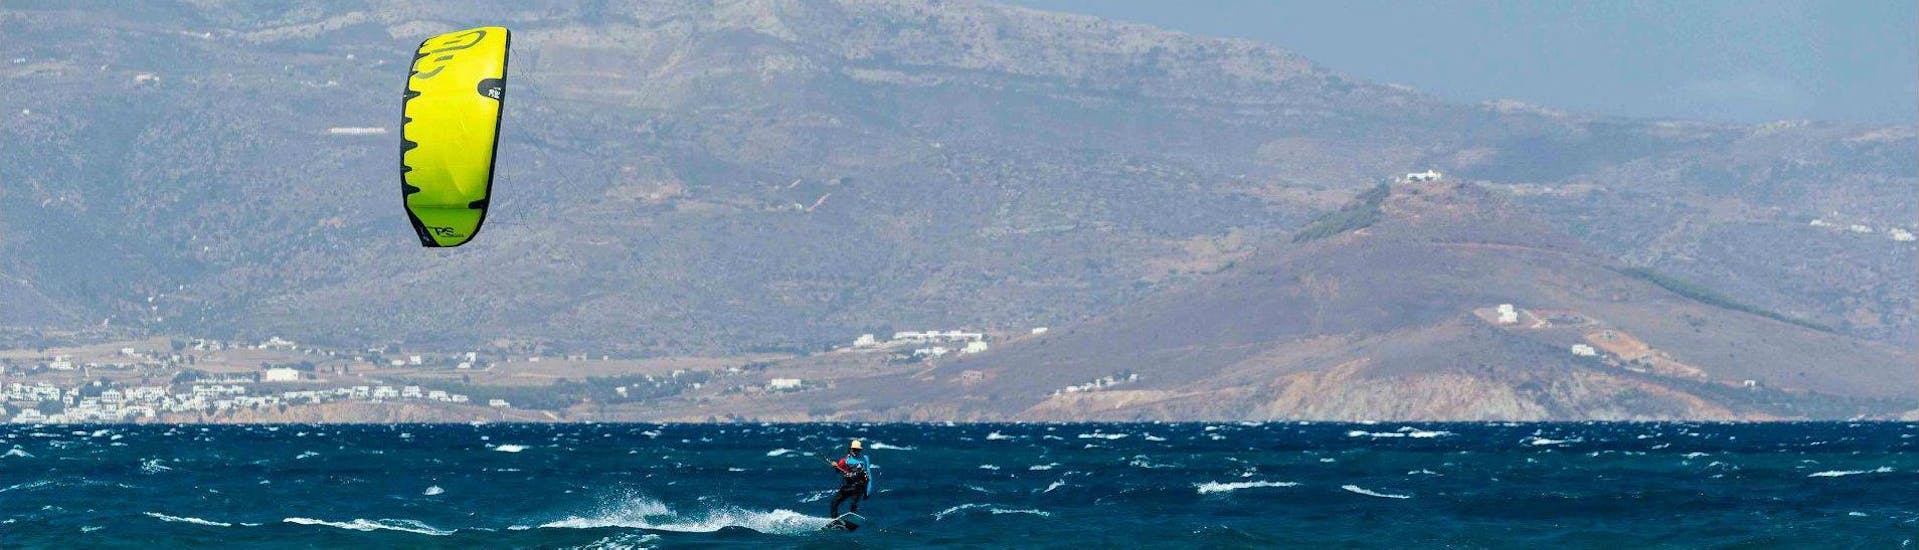 Semi-Private Kitesurfing Lessons - All Levels &amp; Ages with Naxos Kitelife - Hero image